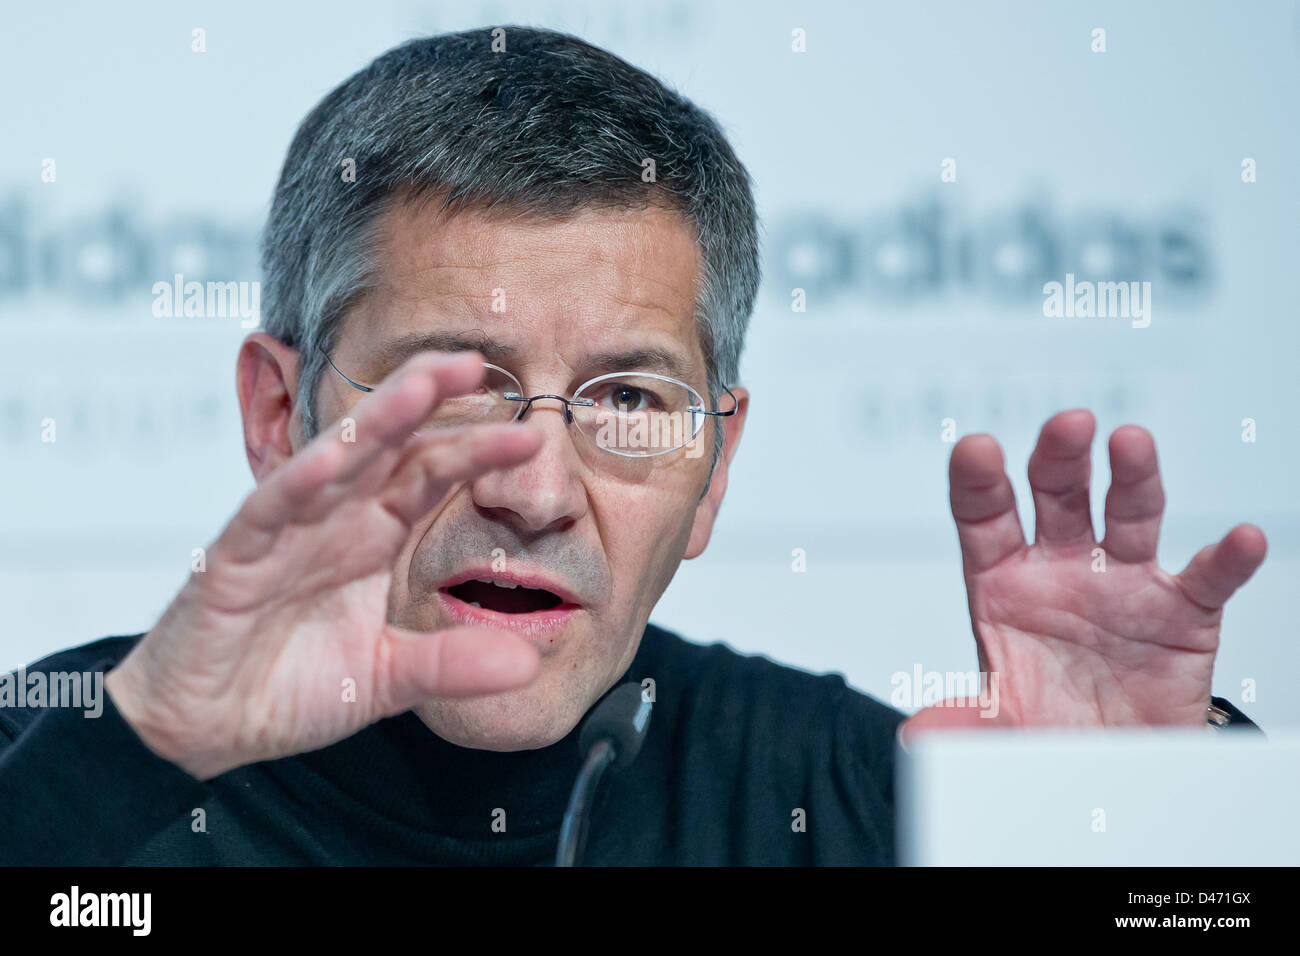 adidas CEO Herbert Hainer speaks at the company's financial statement press conference in Herzogenaurach, Germany, 07 March 2013. Photo: DANIEL KARMANN Stock Photo